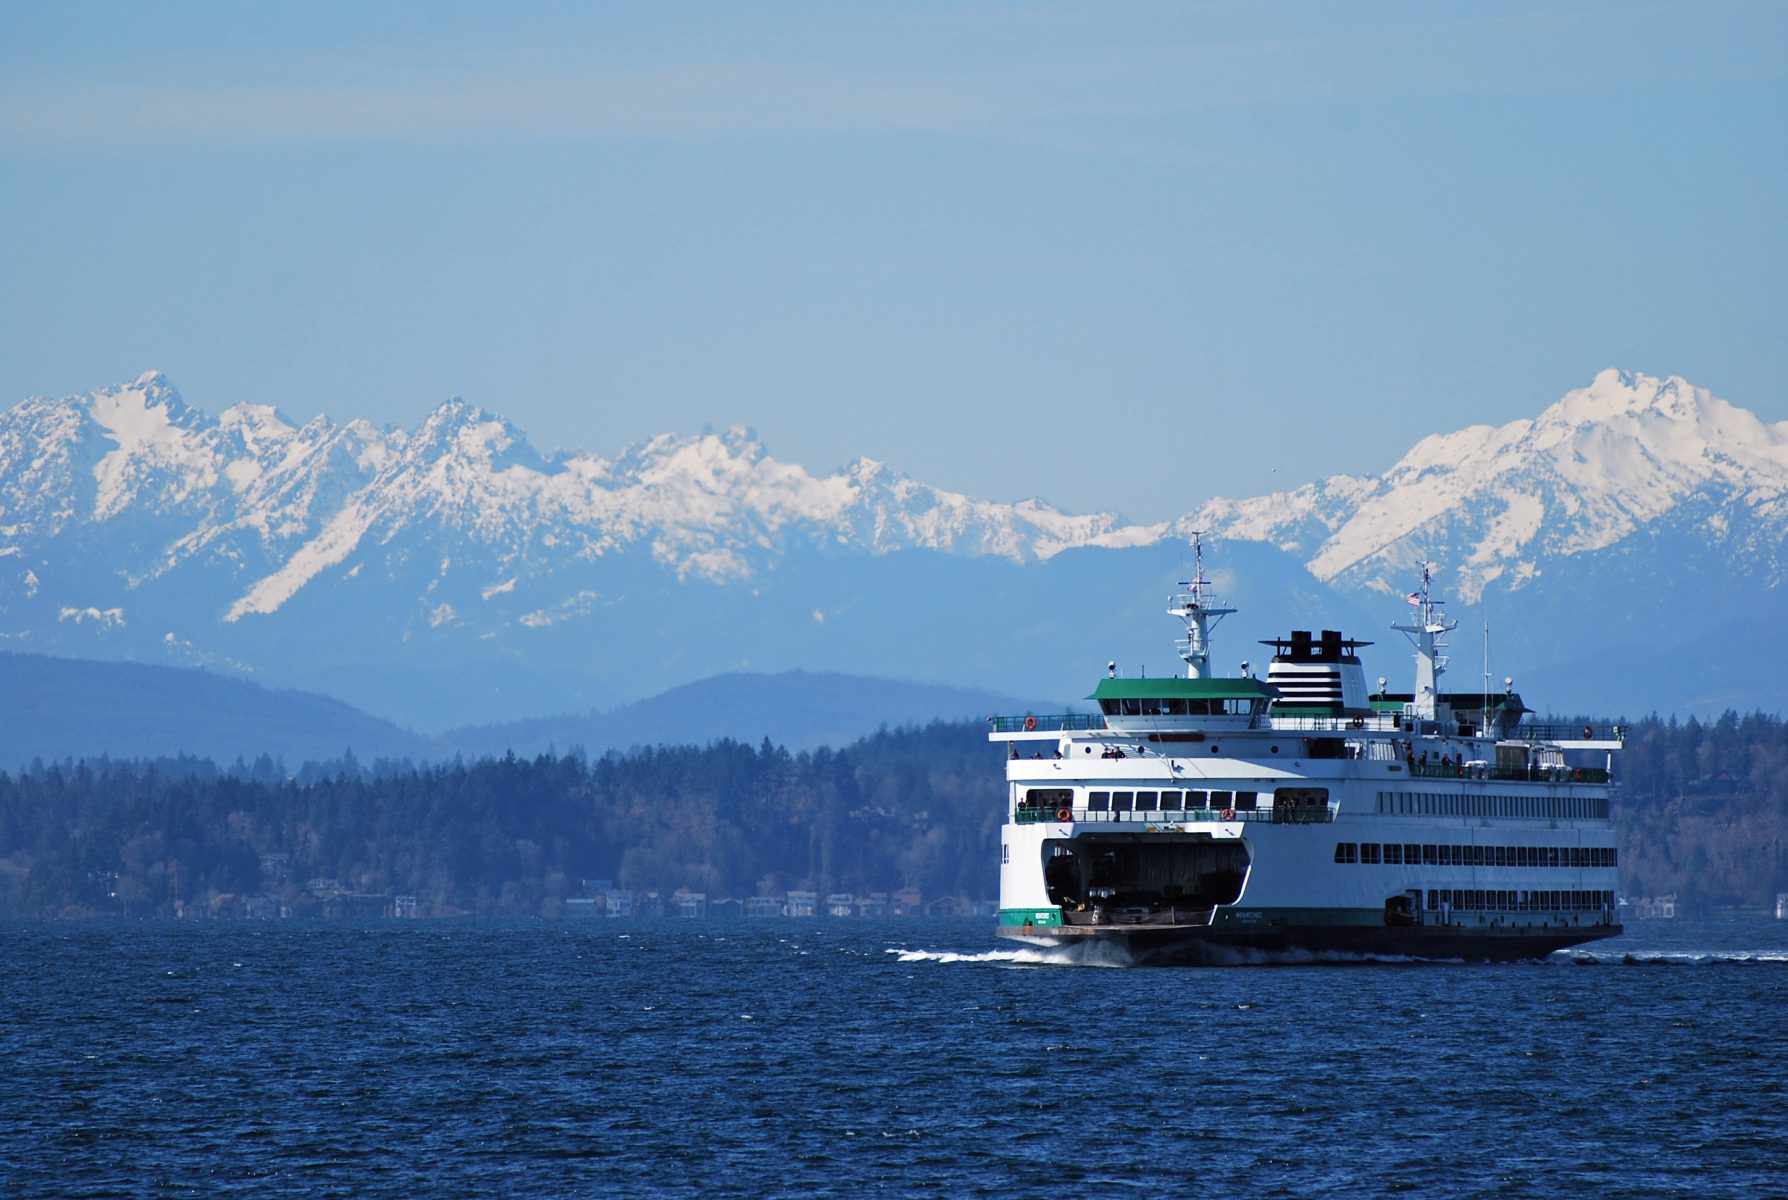 Washington State Ferry crossing Puget Sound with Olympic Mountains in the background